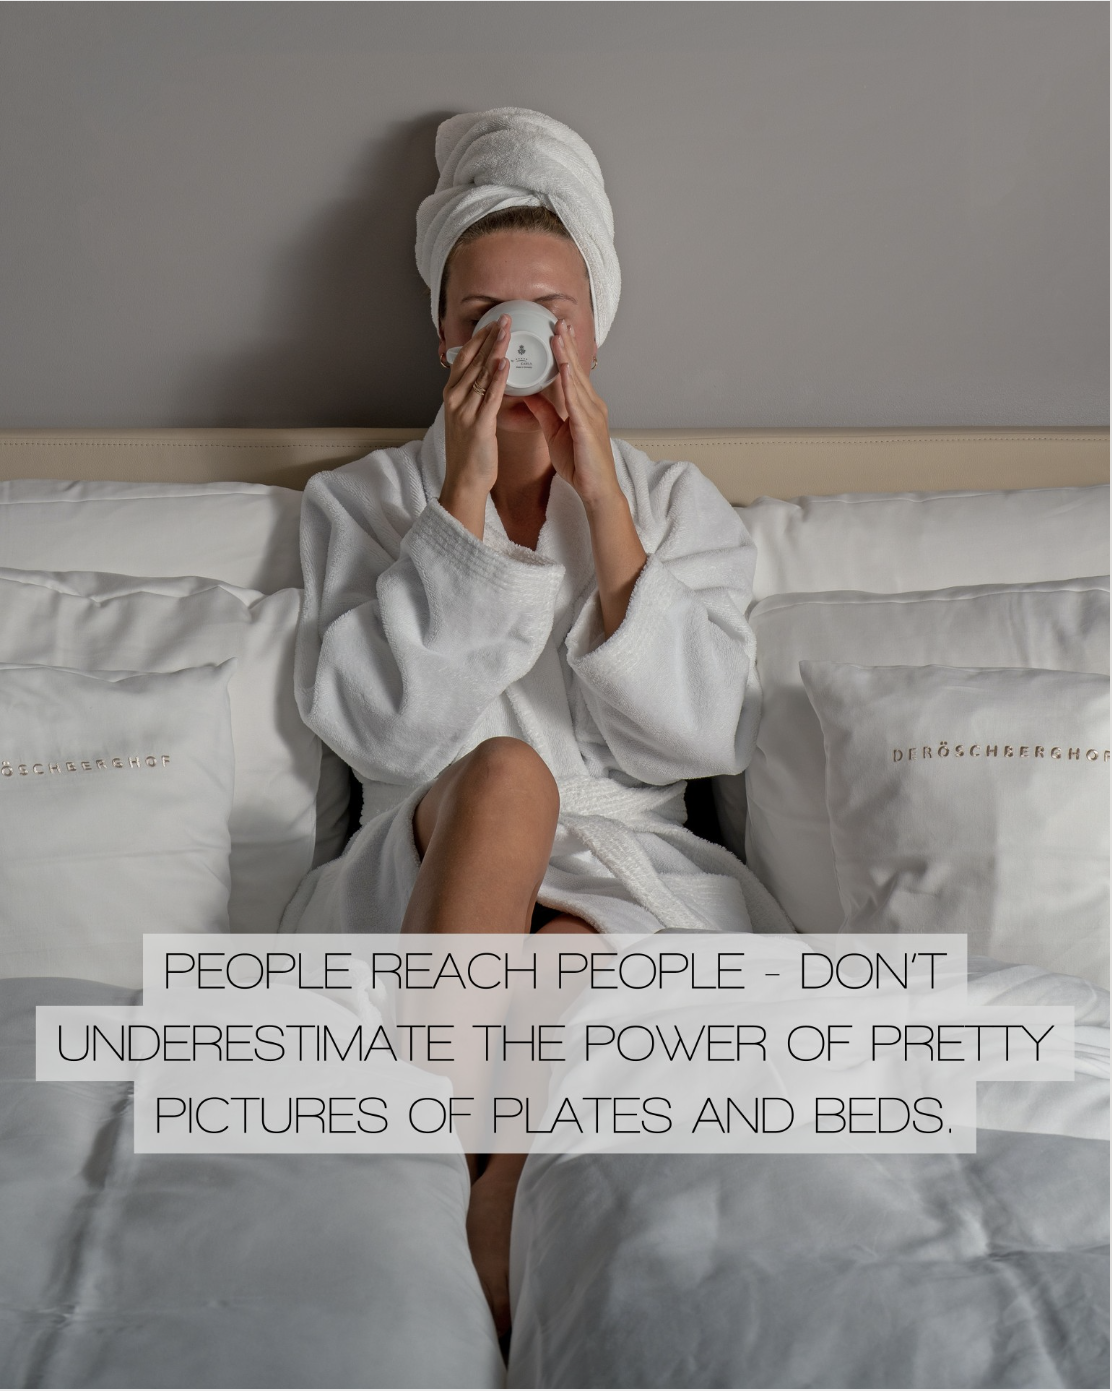 People Reach People - Influencers in Hospitality